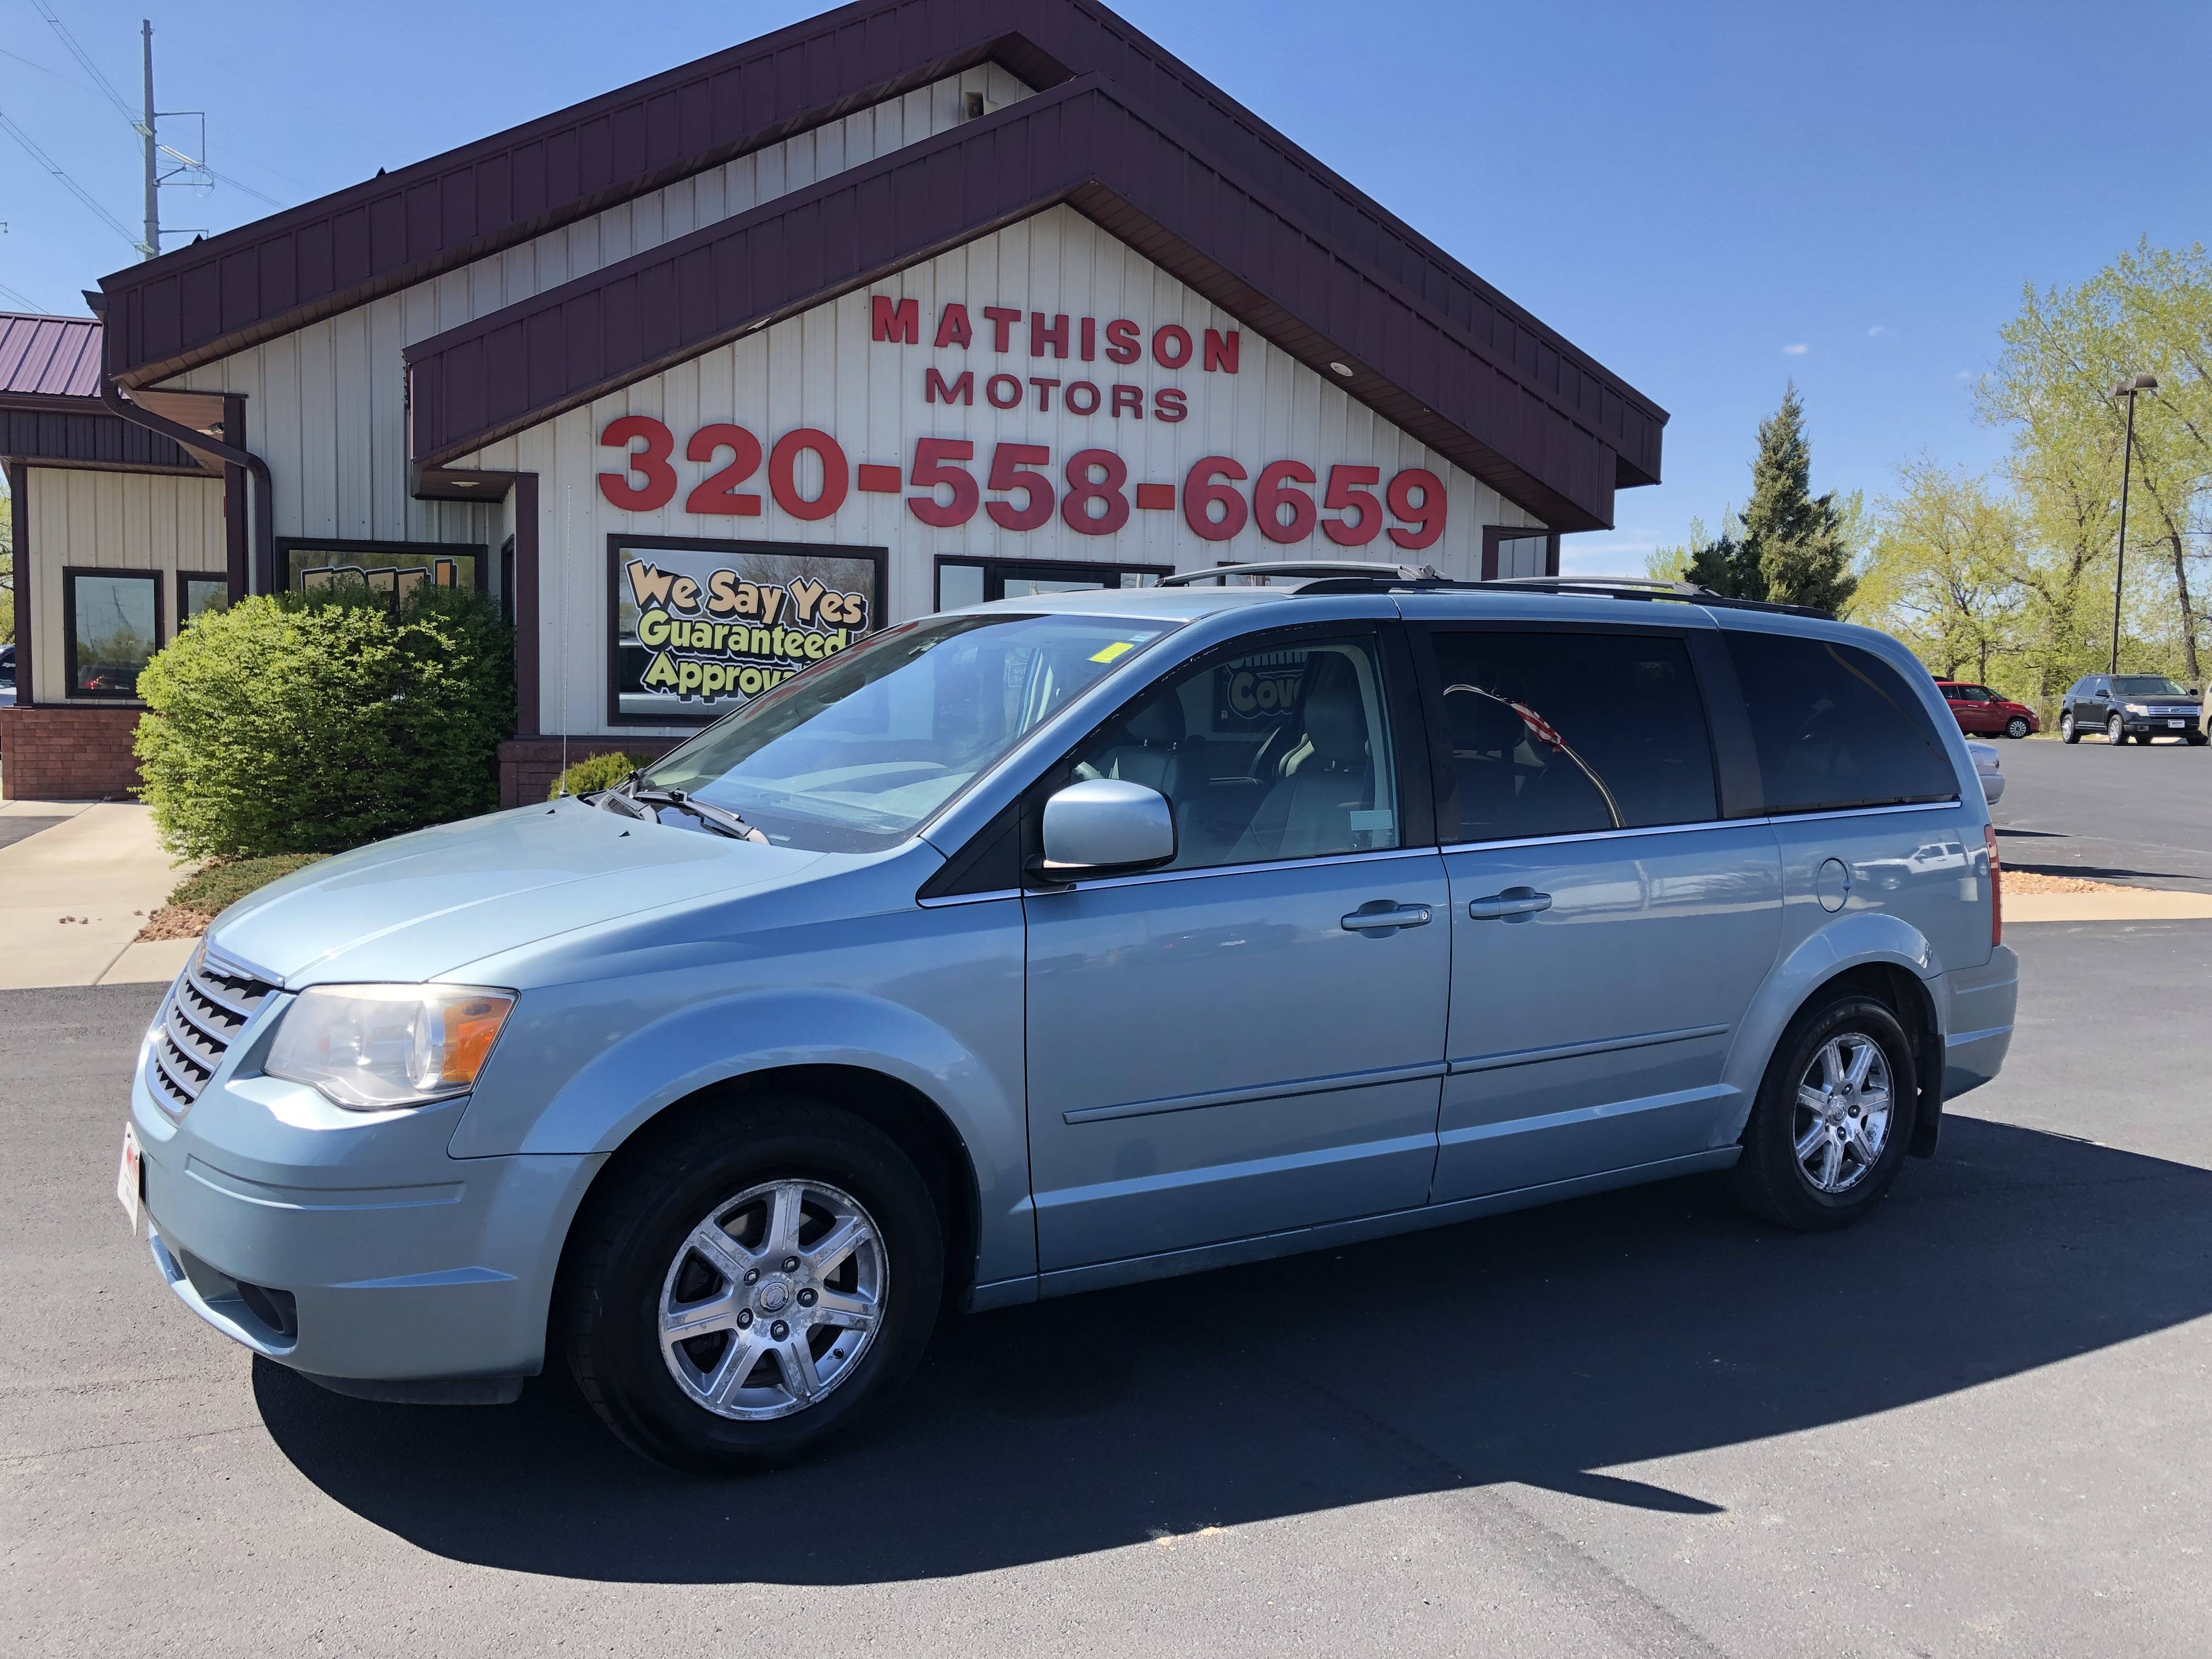 Used 2008 CHRYSLER TOWN AND COUNTRY TOURING for sale in